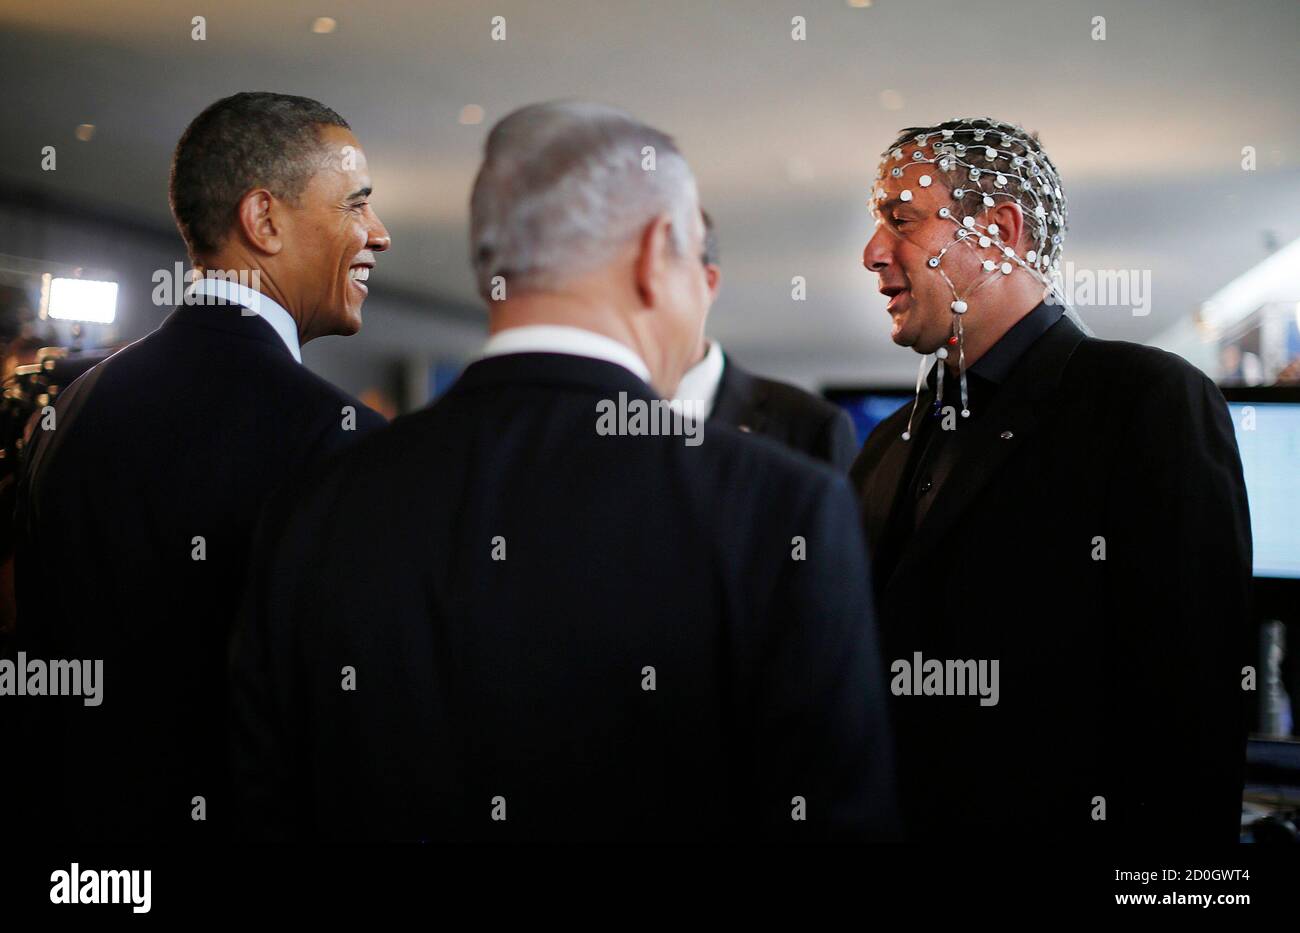 U.S. President Barack Obama (L) and Israeli Prime Minister Benjamin Netanyahu (C) speak with Professor Amir Geva (R), head of the biomedical signal processing and pattern recognition lab at the Ben-Gurion University of the Negev, as they tour a technology expo at the Israel Museum in Jerusalem March 21, 2013.   REUTERS/Jason Reed   (JERUSALEM - Tags: POLITICS TPX IMAGES OF THE DAY) Stock Photo